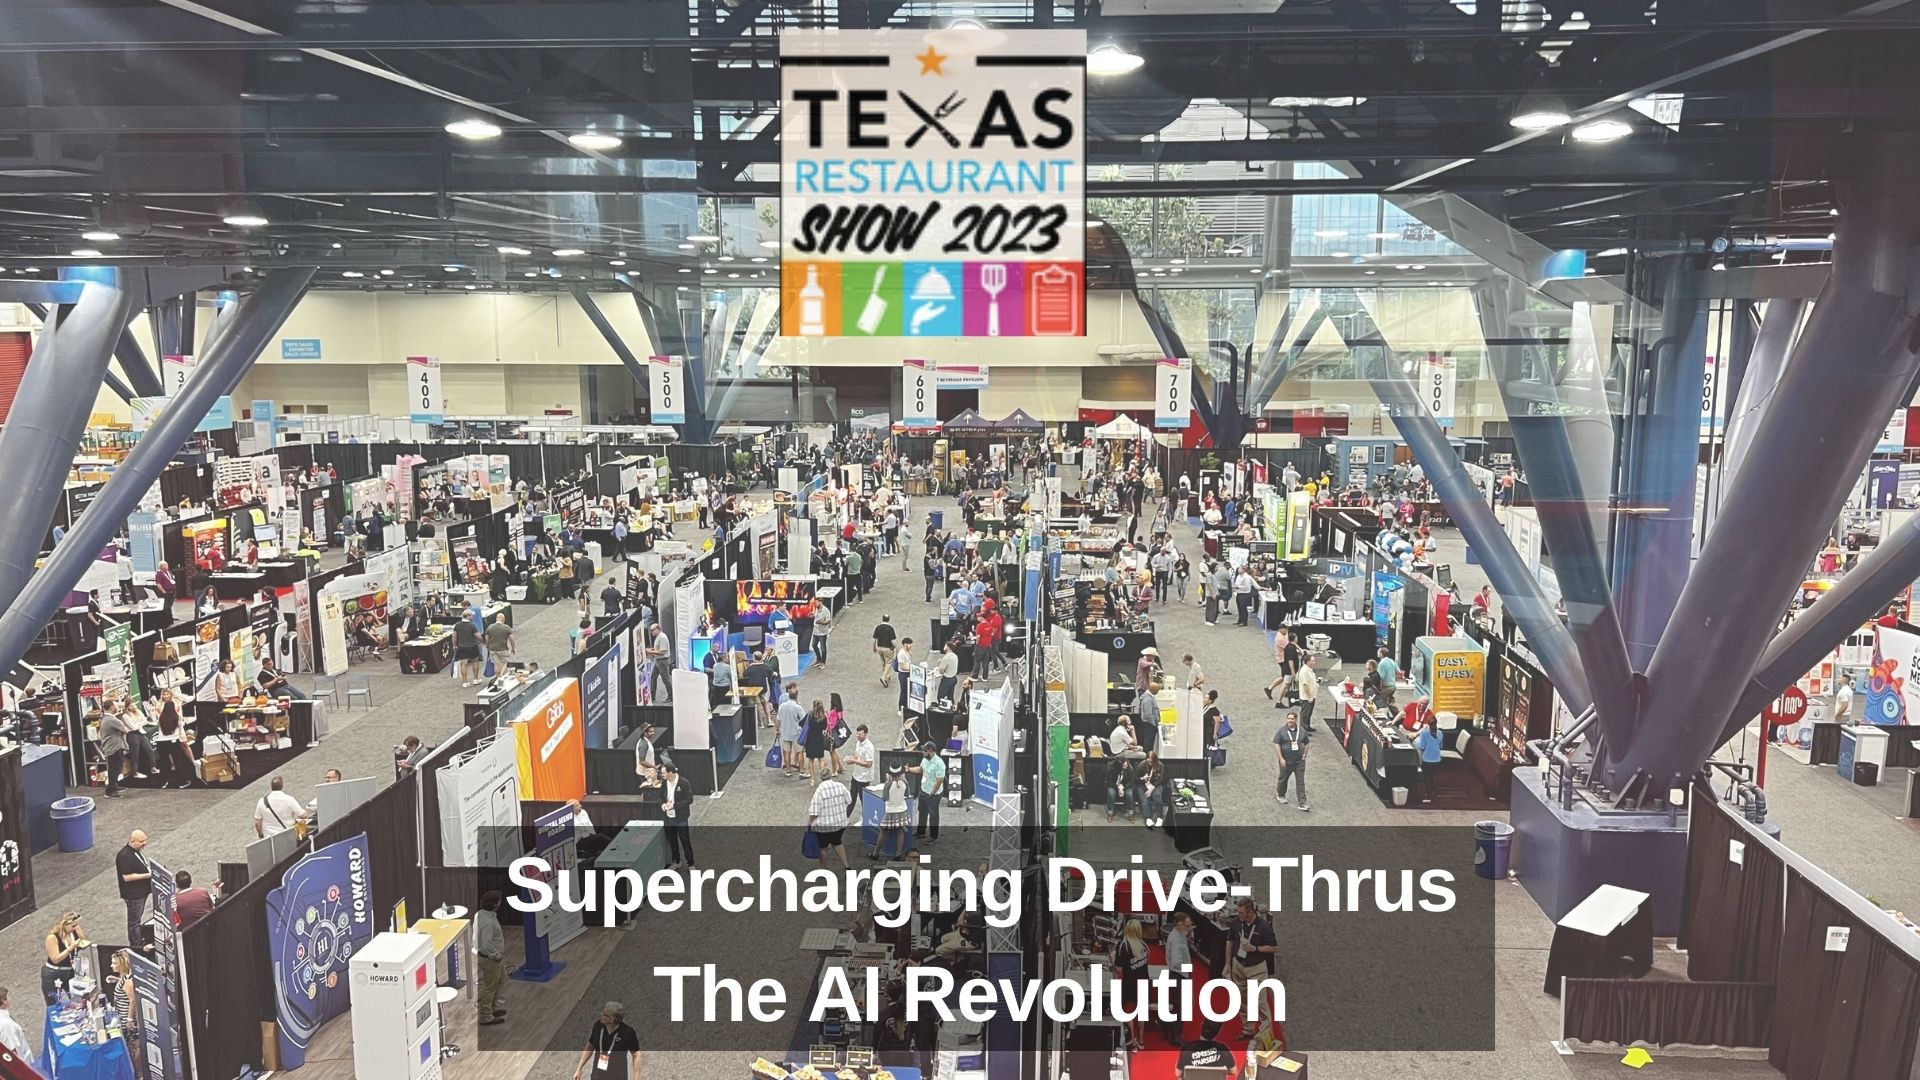 Supercharging Drive-Thrus: The AI Revolution in Restaurant Industry